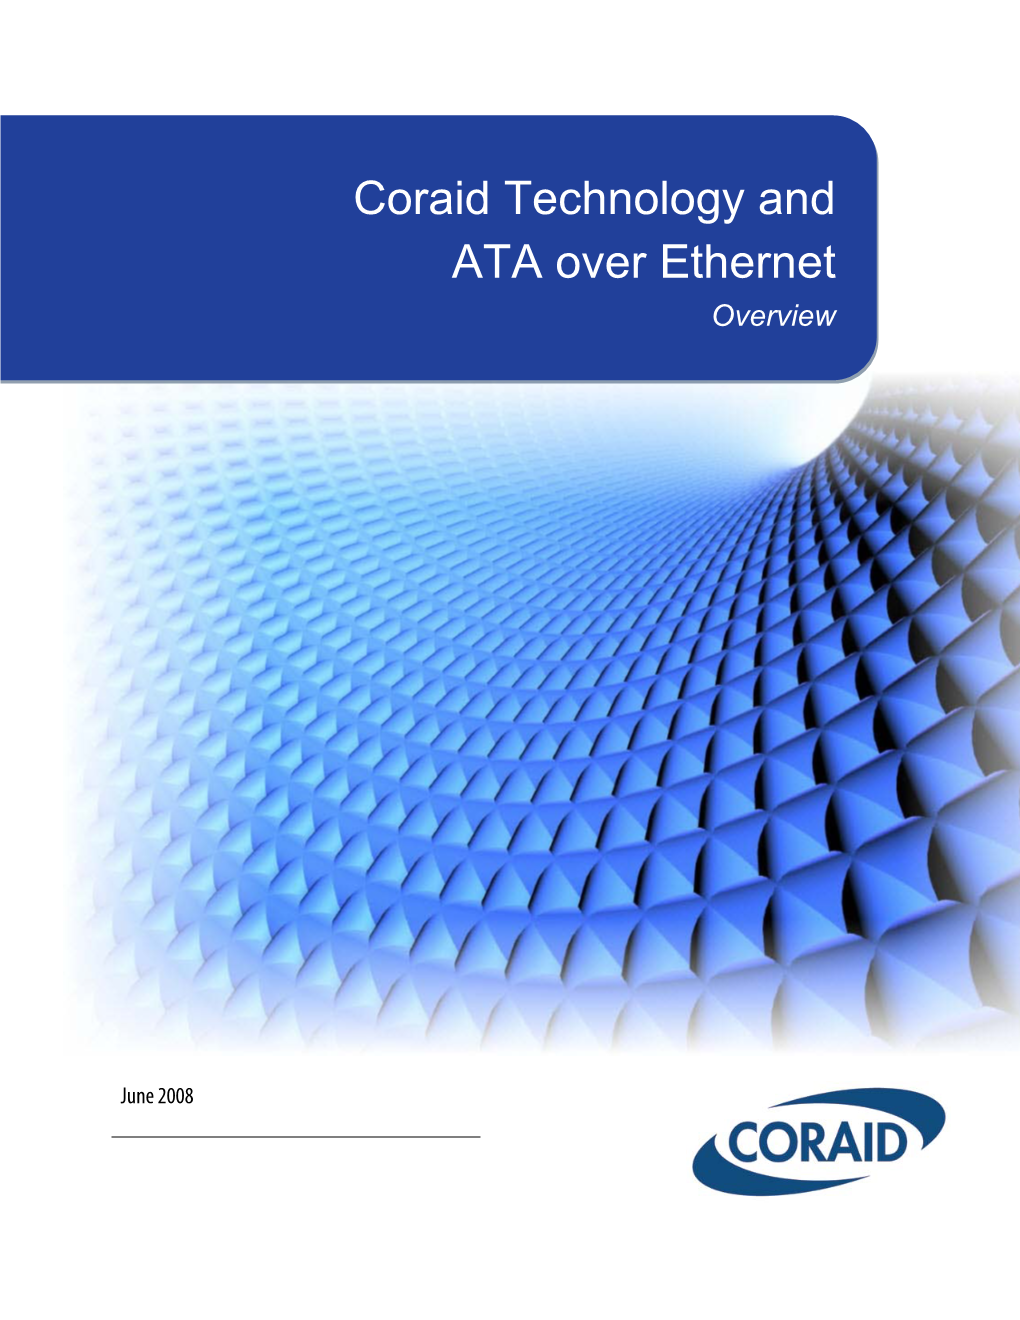 Coraid Technology and ATA Over Ethernet Overview